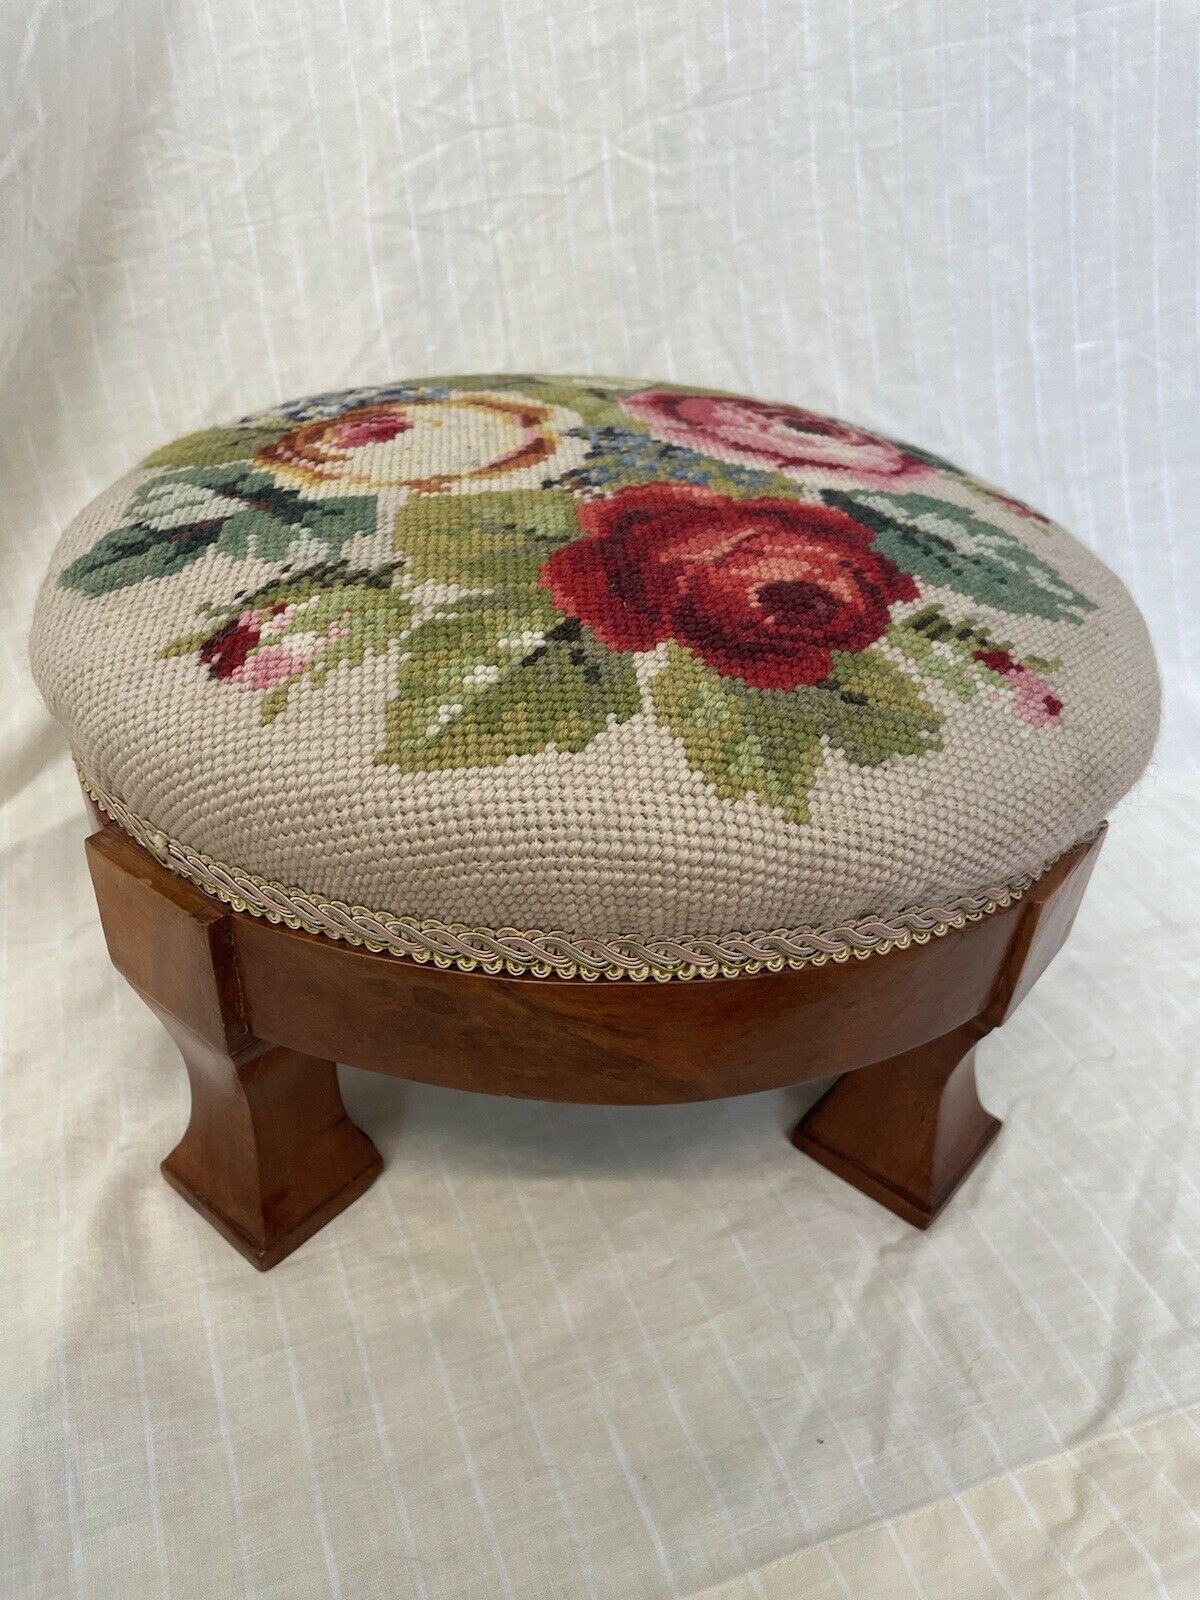 Antique Valuations: Vintage Embroidery Roses Design Foot Rest Stool Tapestry.